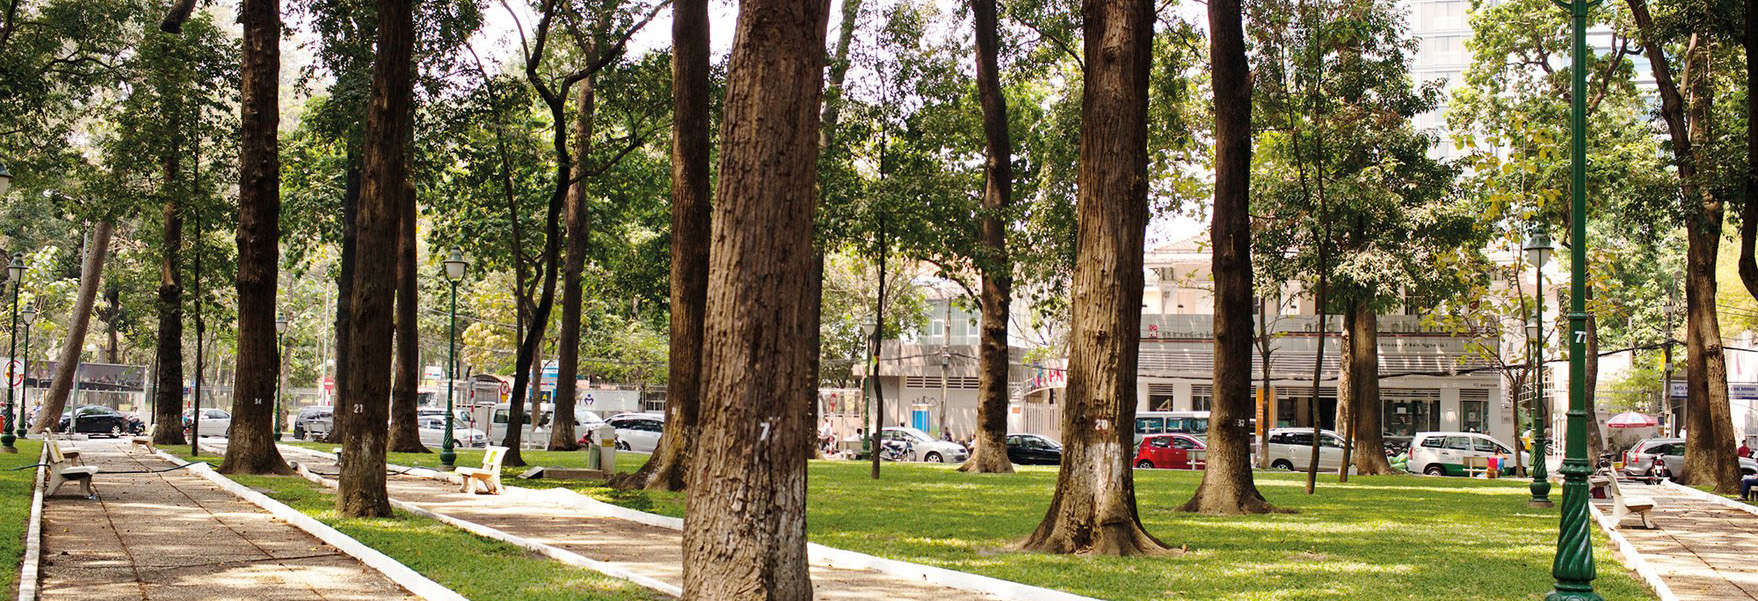 30/4 Park in HCMC - Destination for Relaxation in Nature